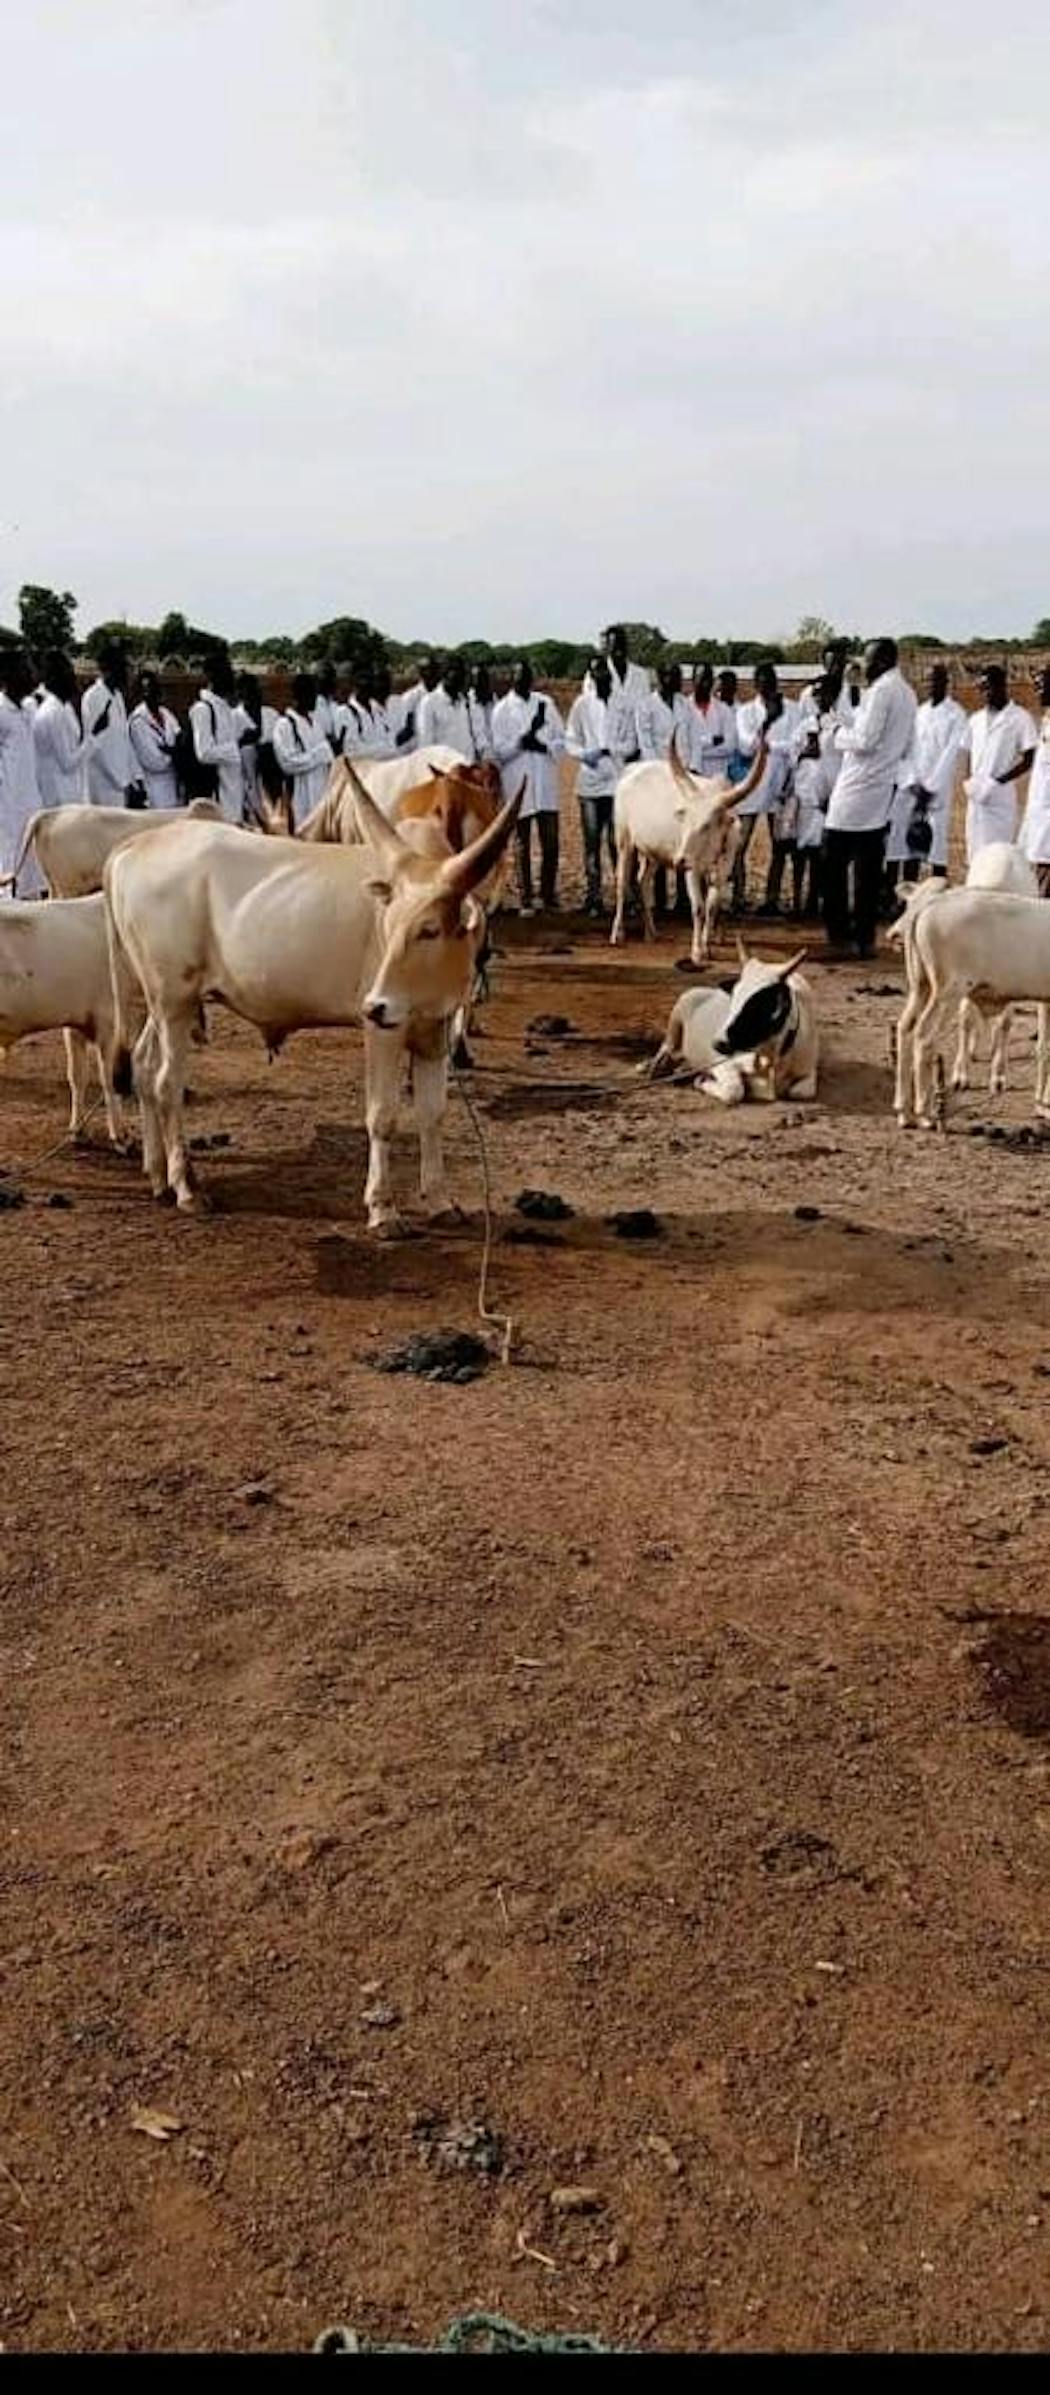 In South Sudan, cows are used as currency.